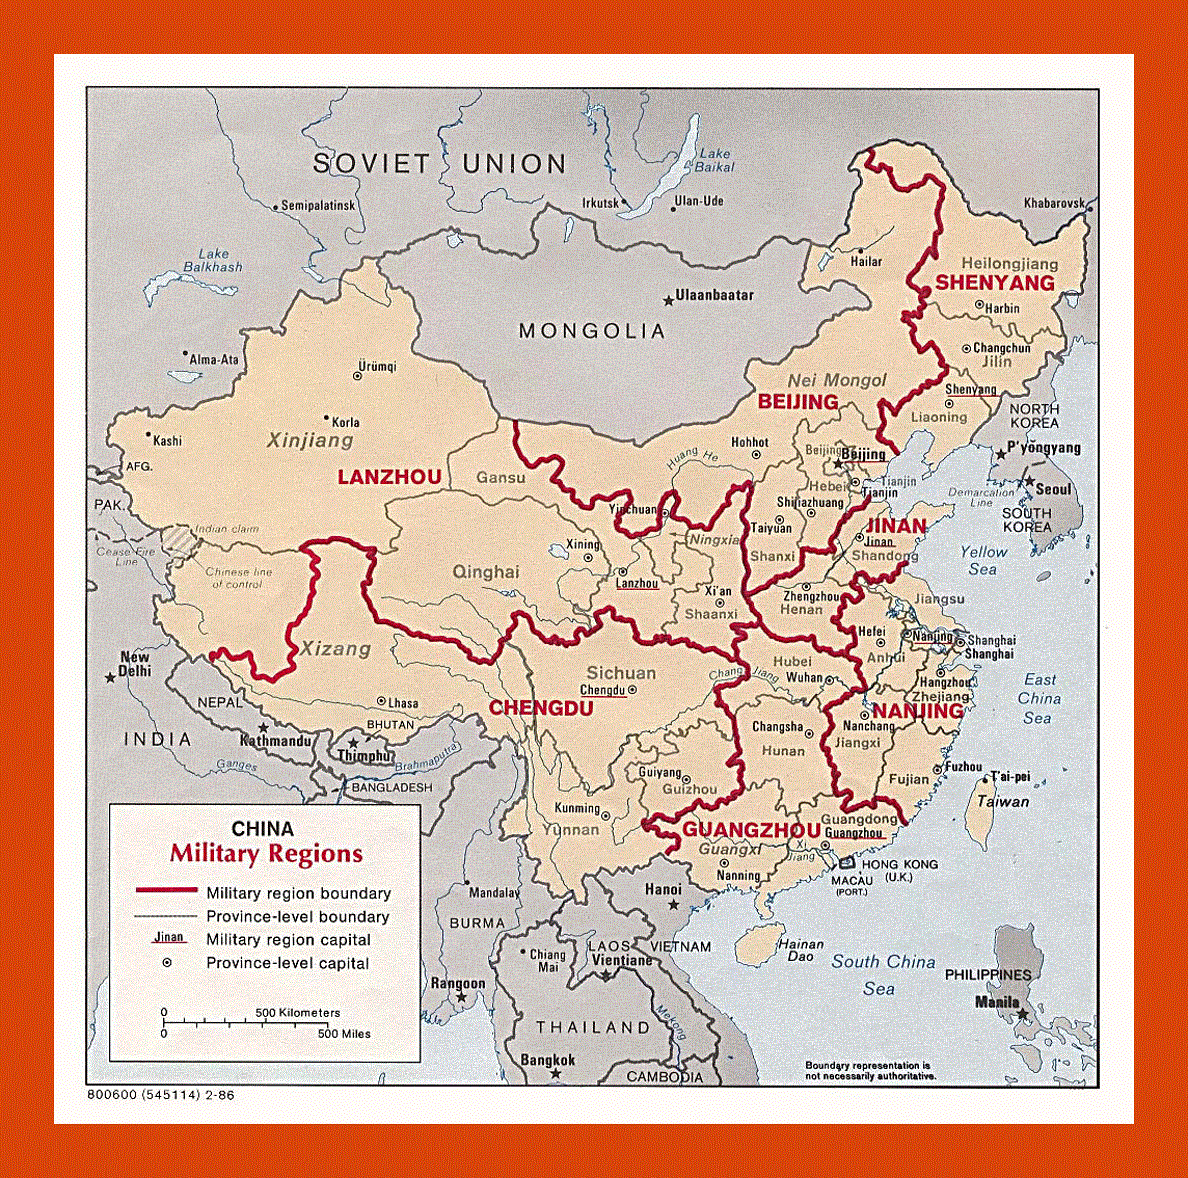 Military regions map of China - 1986